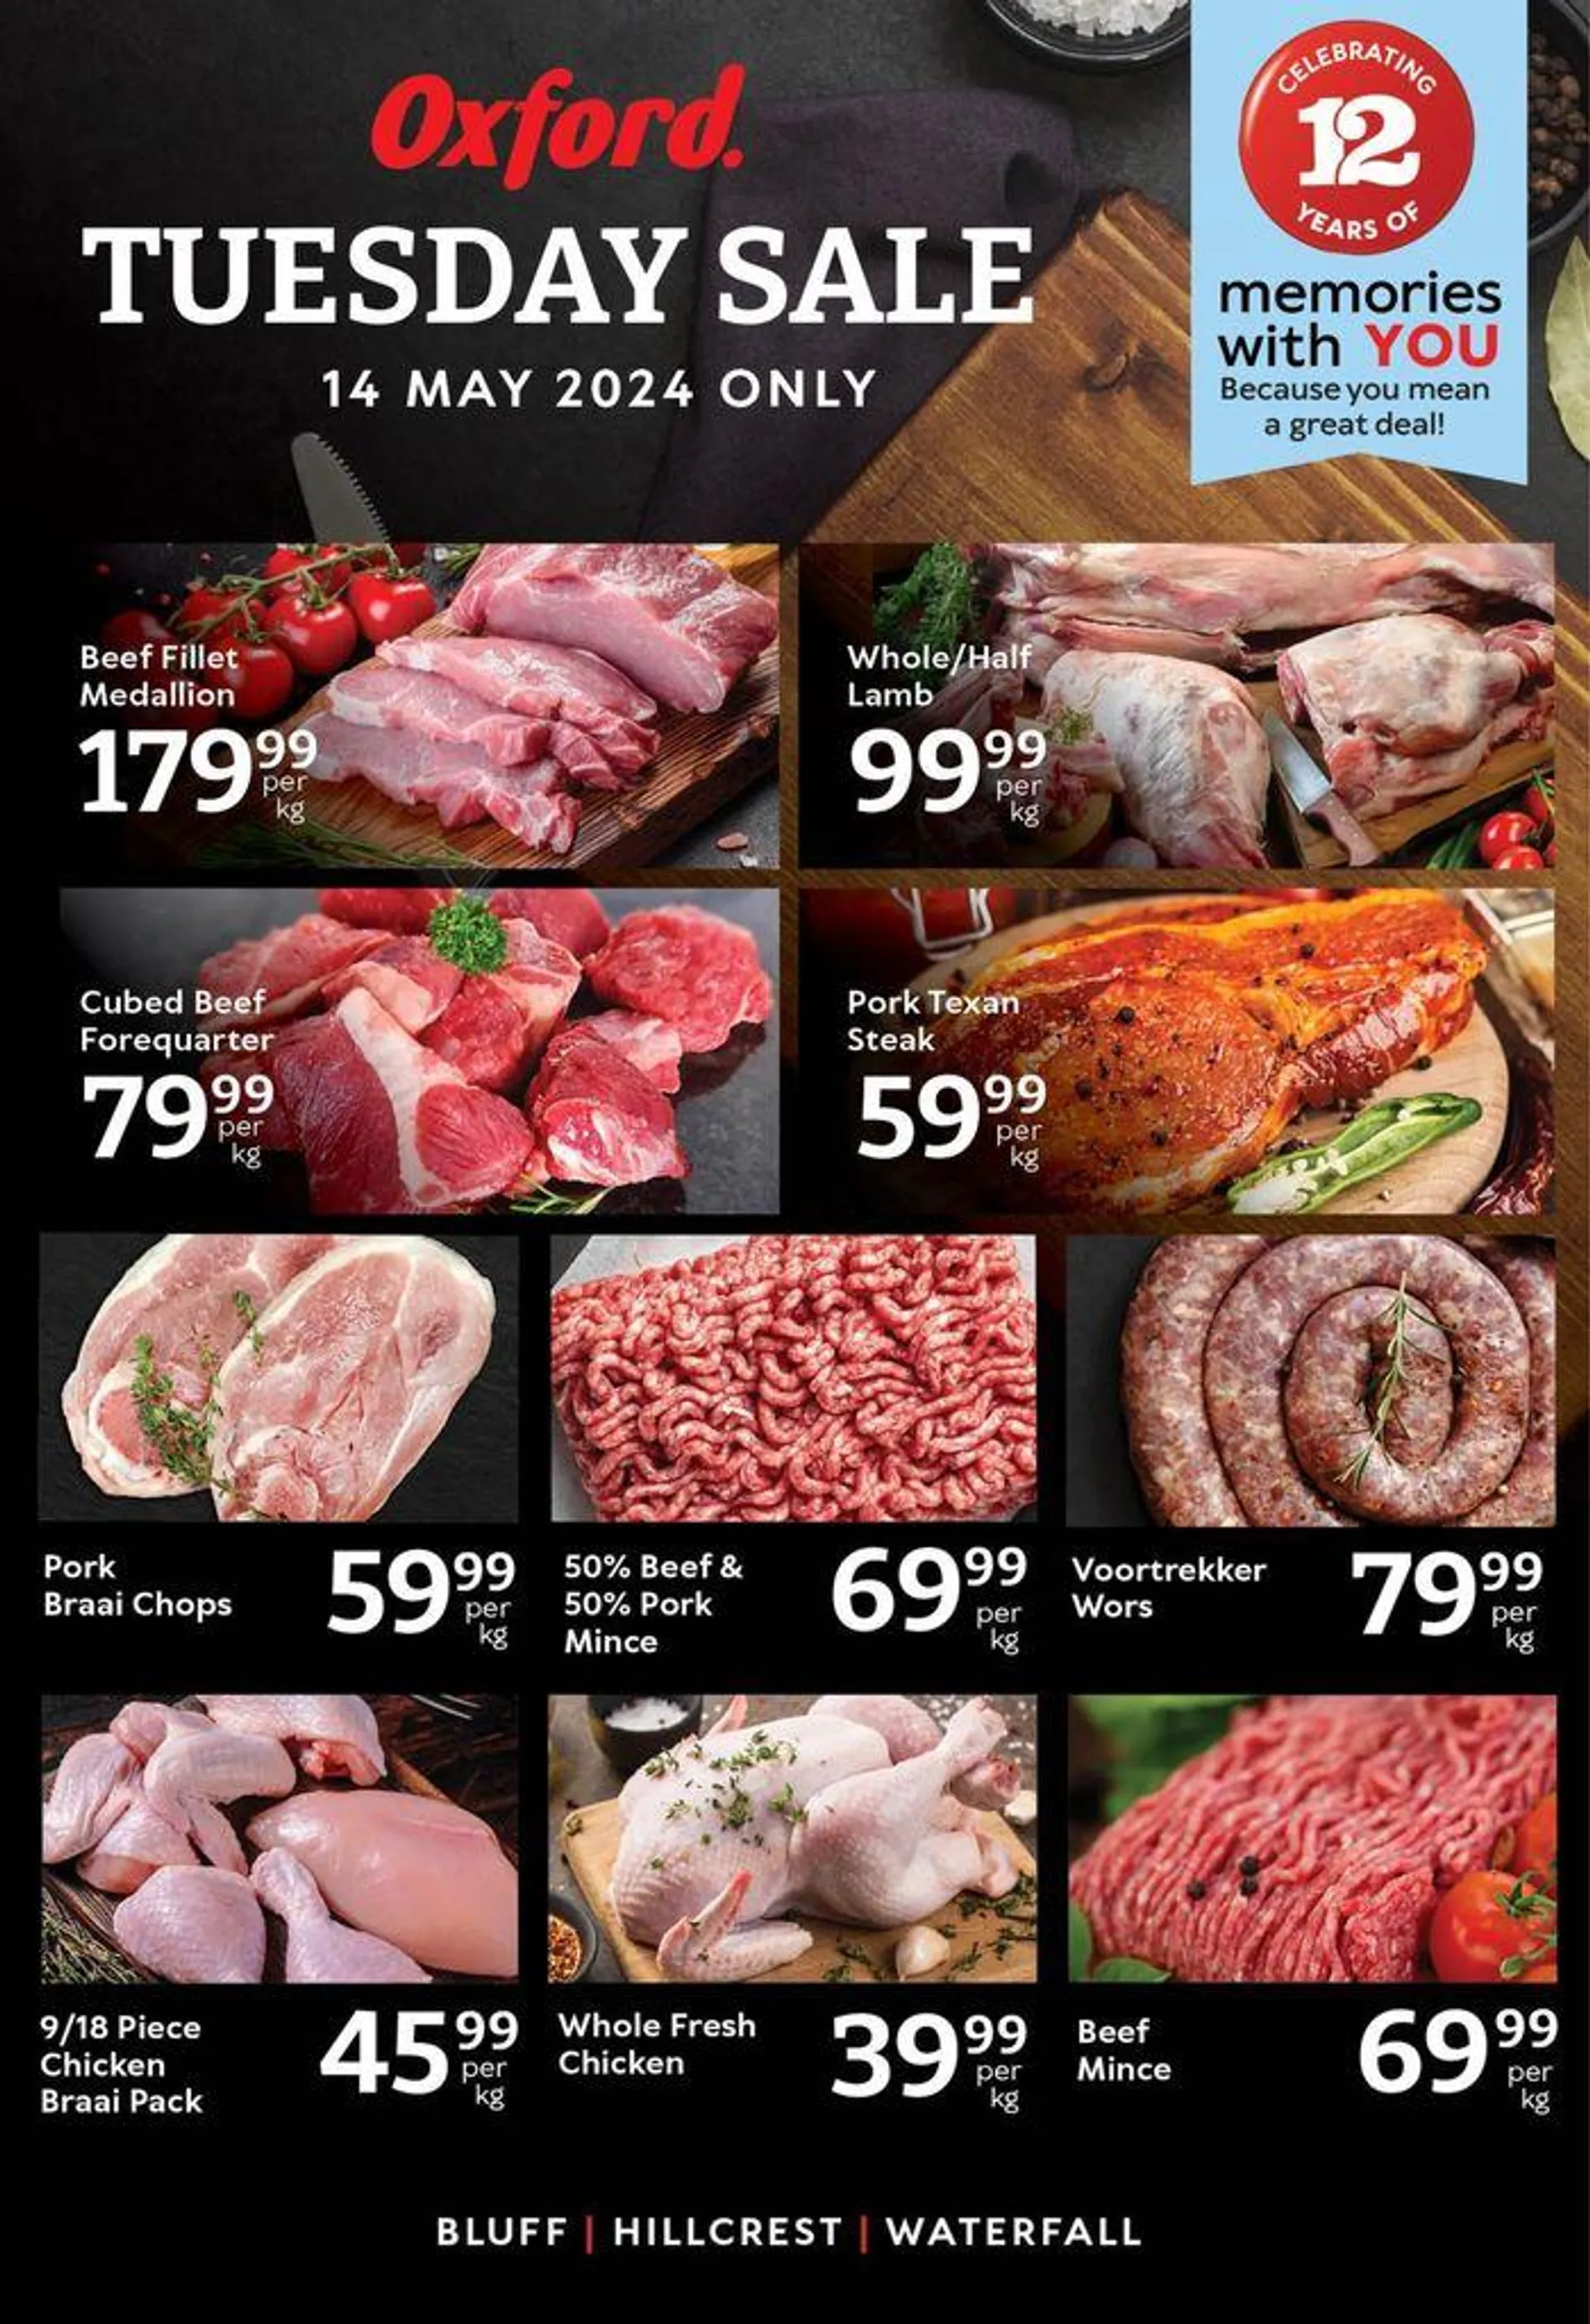 Oxford Freshmarket weekly specials 14 May 2024 - 1